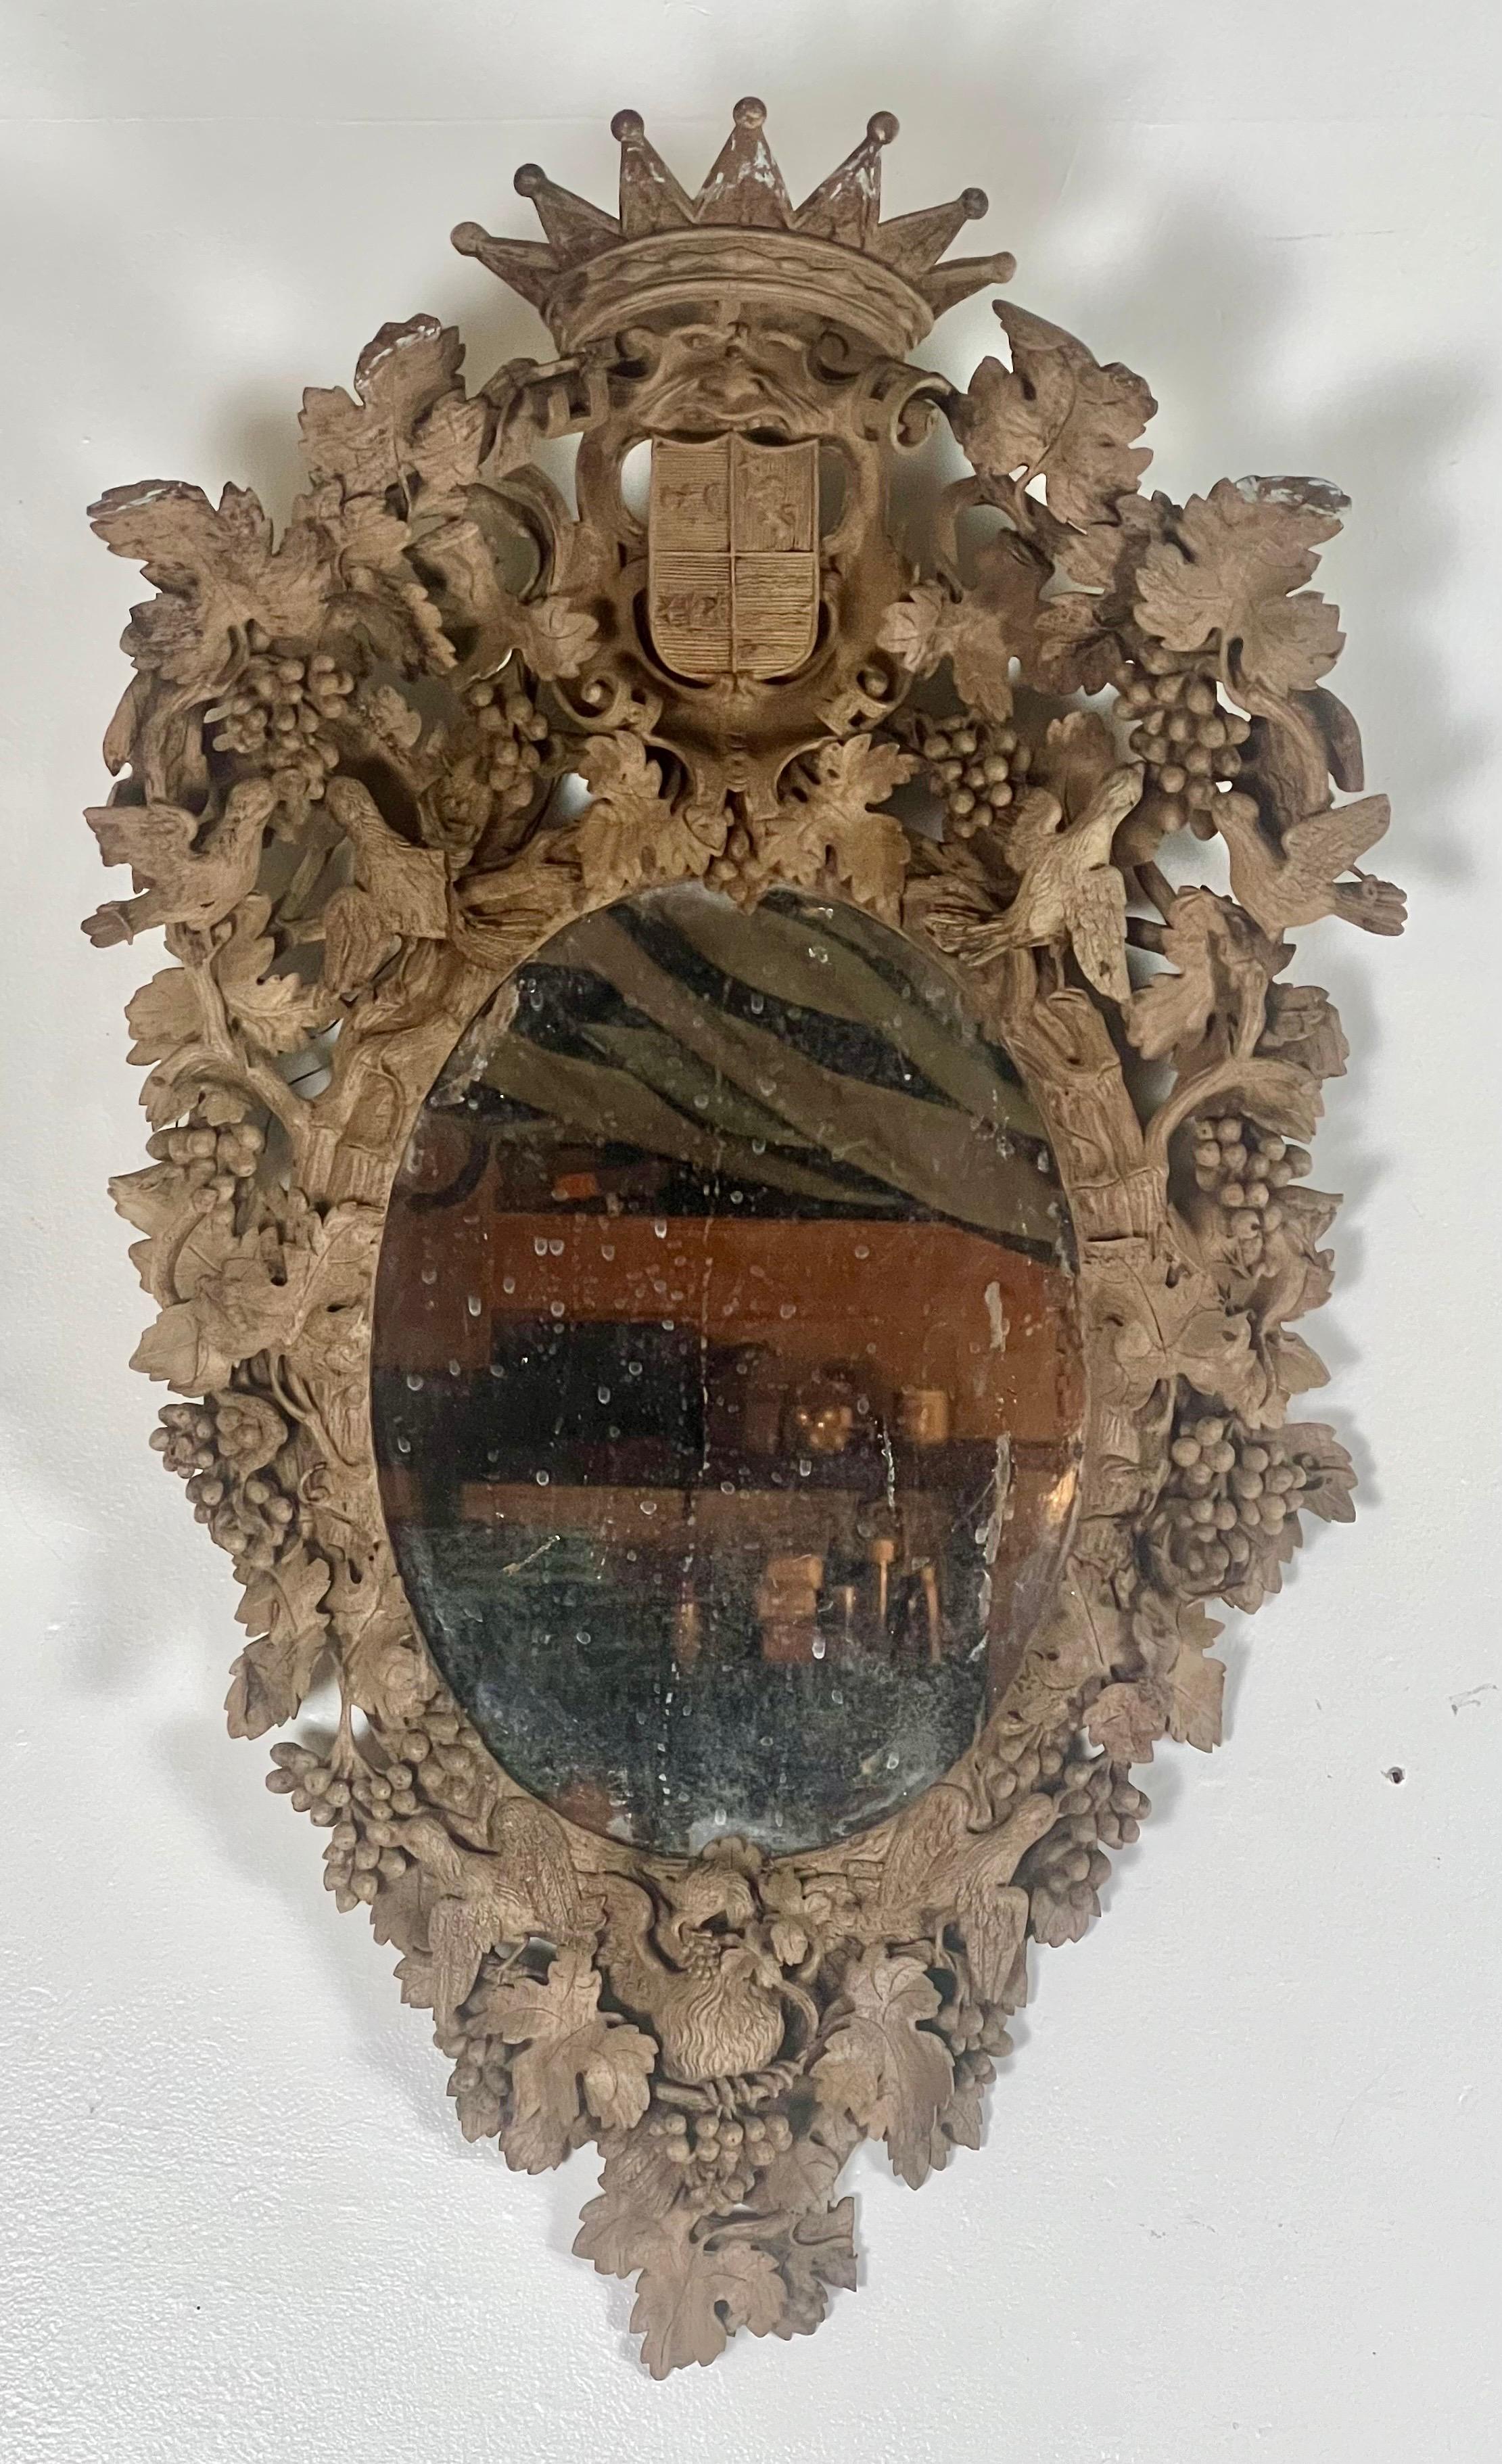 18th century German mirror, finely detailed with a crown, coat of arms, vines with grapes and leaves, and petite birds, all surrounding an oval-shaped mirror.